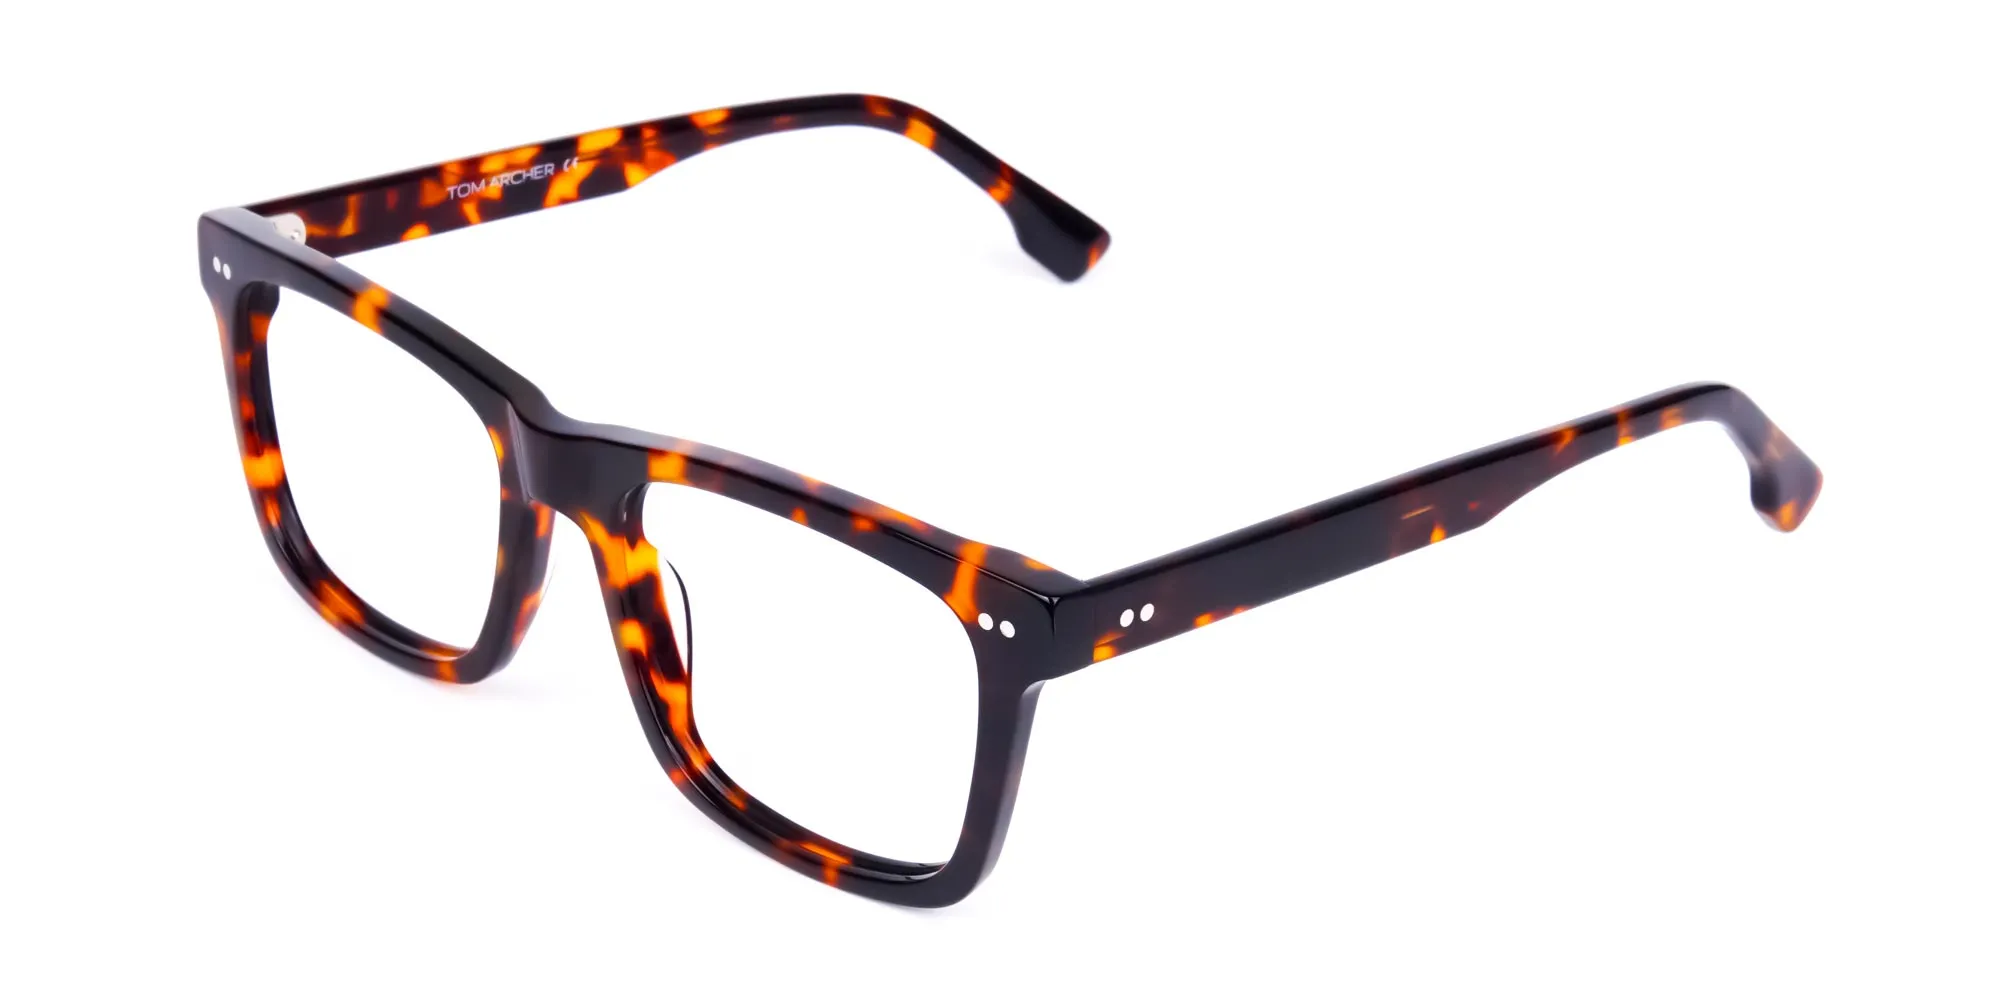 Love Tony Stark's glasses? Get your hands on a similar pair of